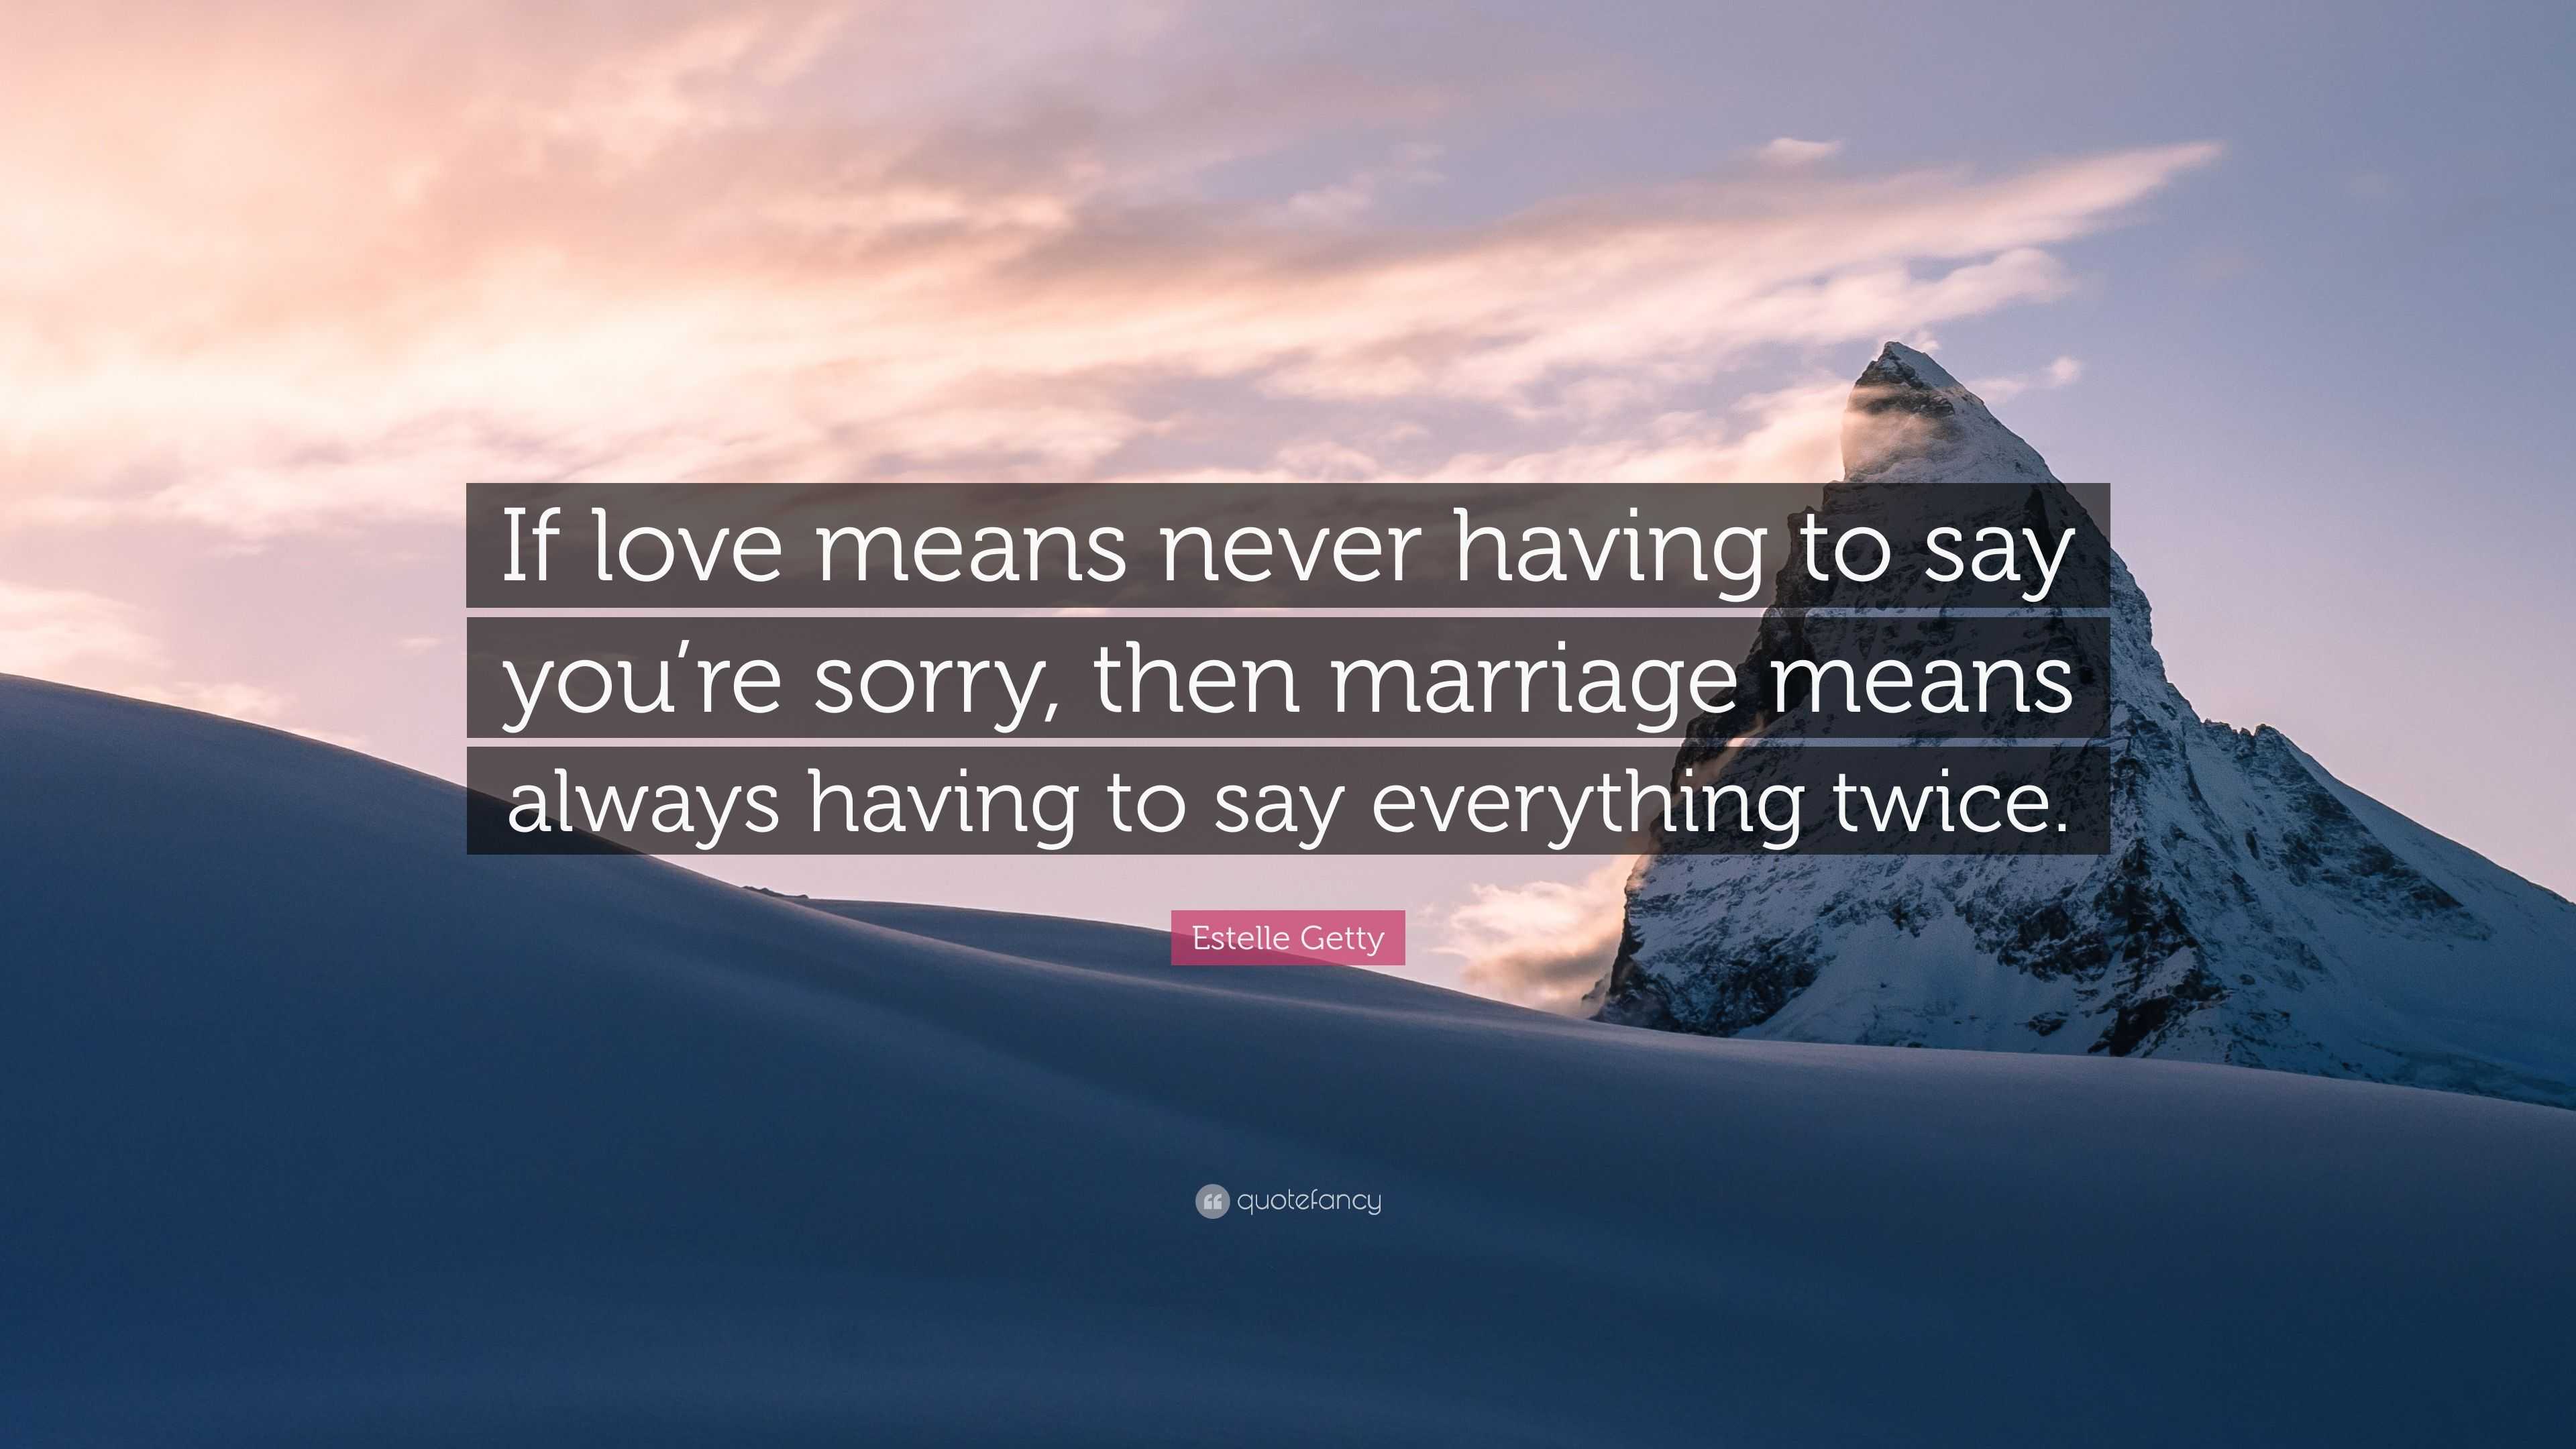 Estelle Getty Quote “If love means never having to say you re sorry